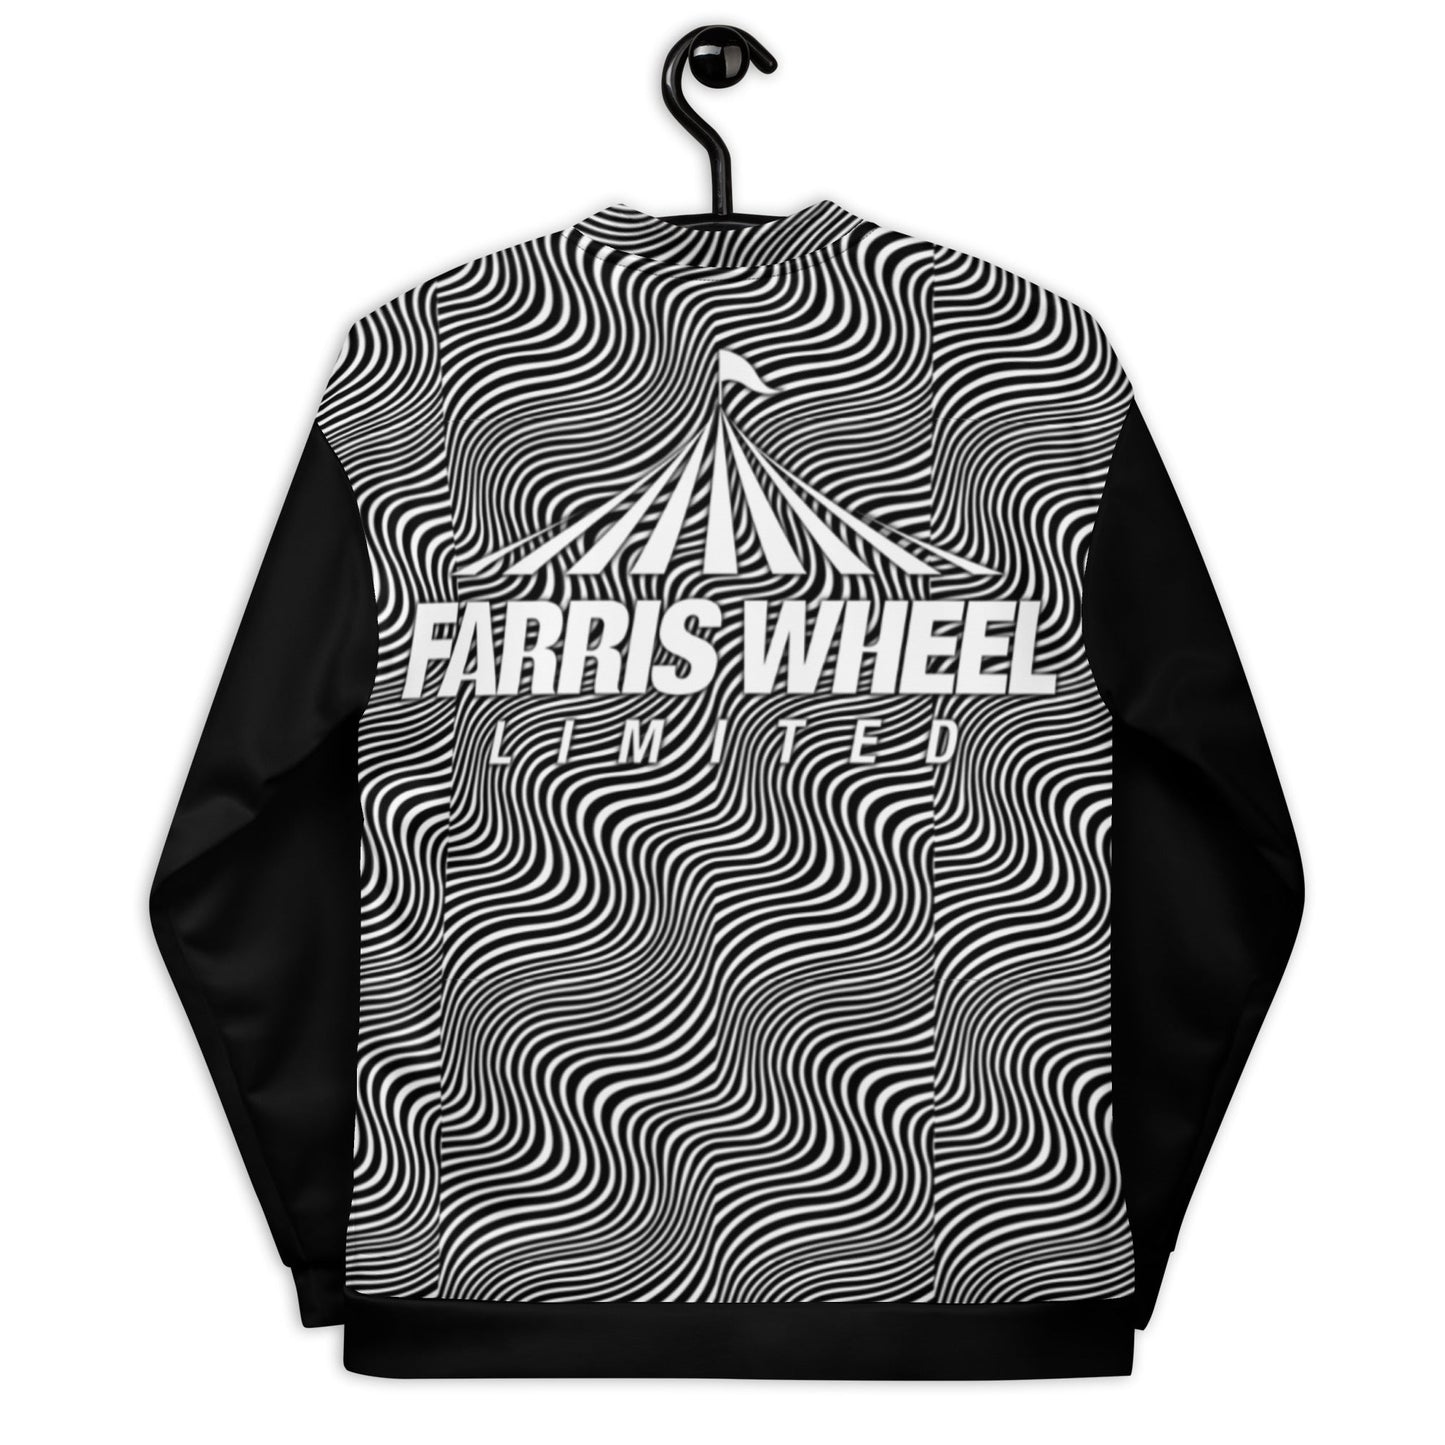 Farris Wheel Limited Trippy Unisex Bomber Jacket - BeExtra! Apparel & More